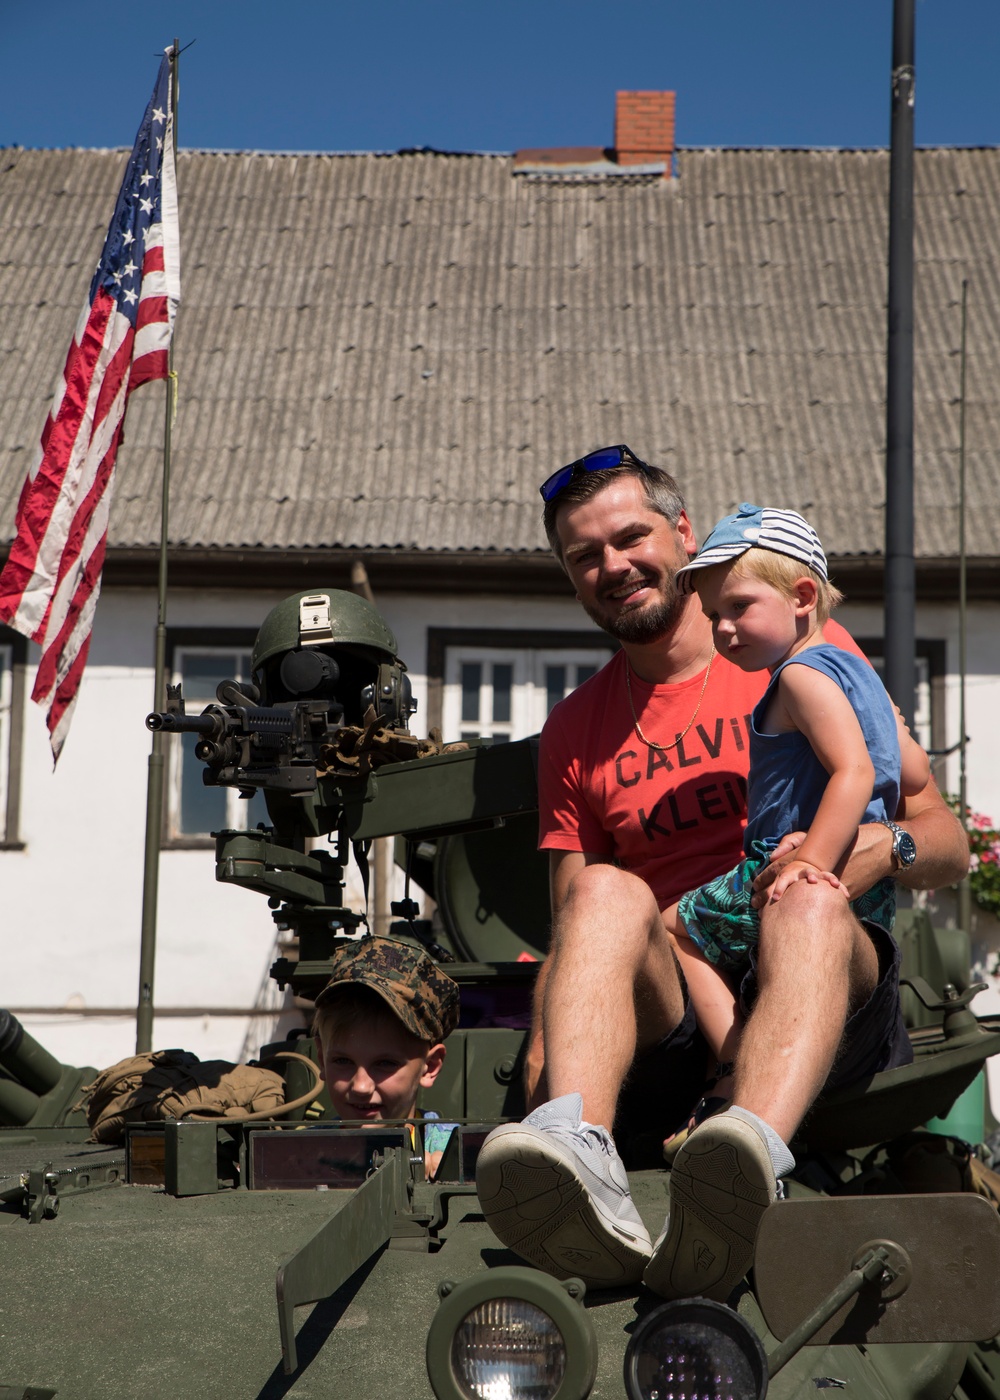 4th Lar Marines Interact With Latvian Locals During Saber Strike 18